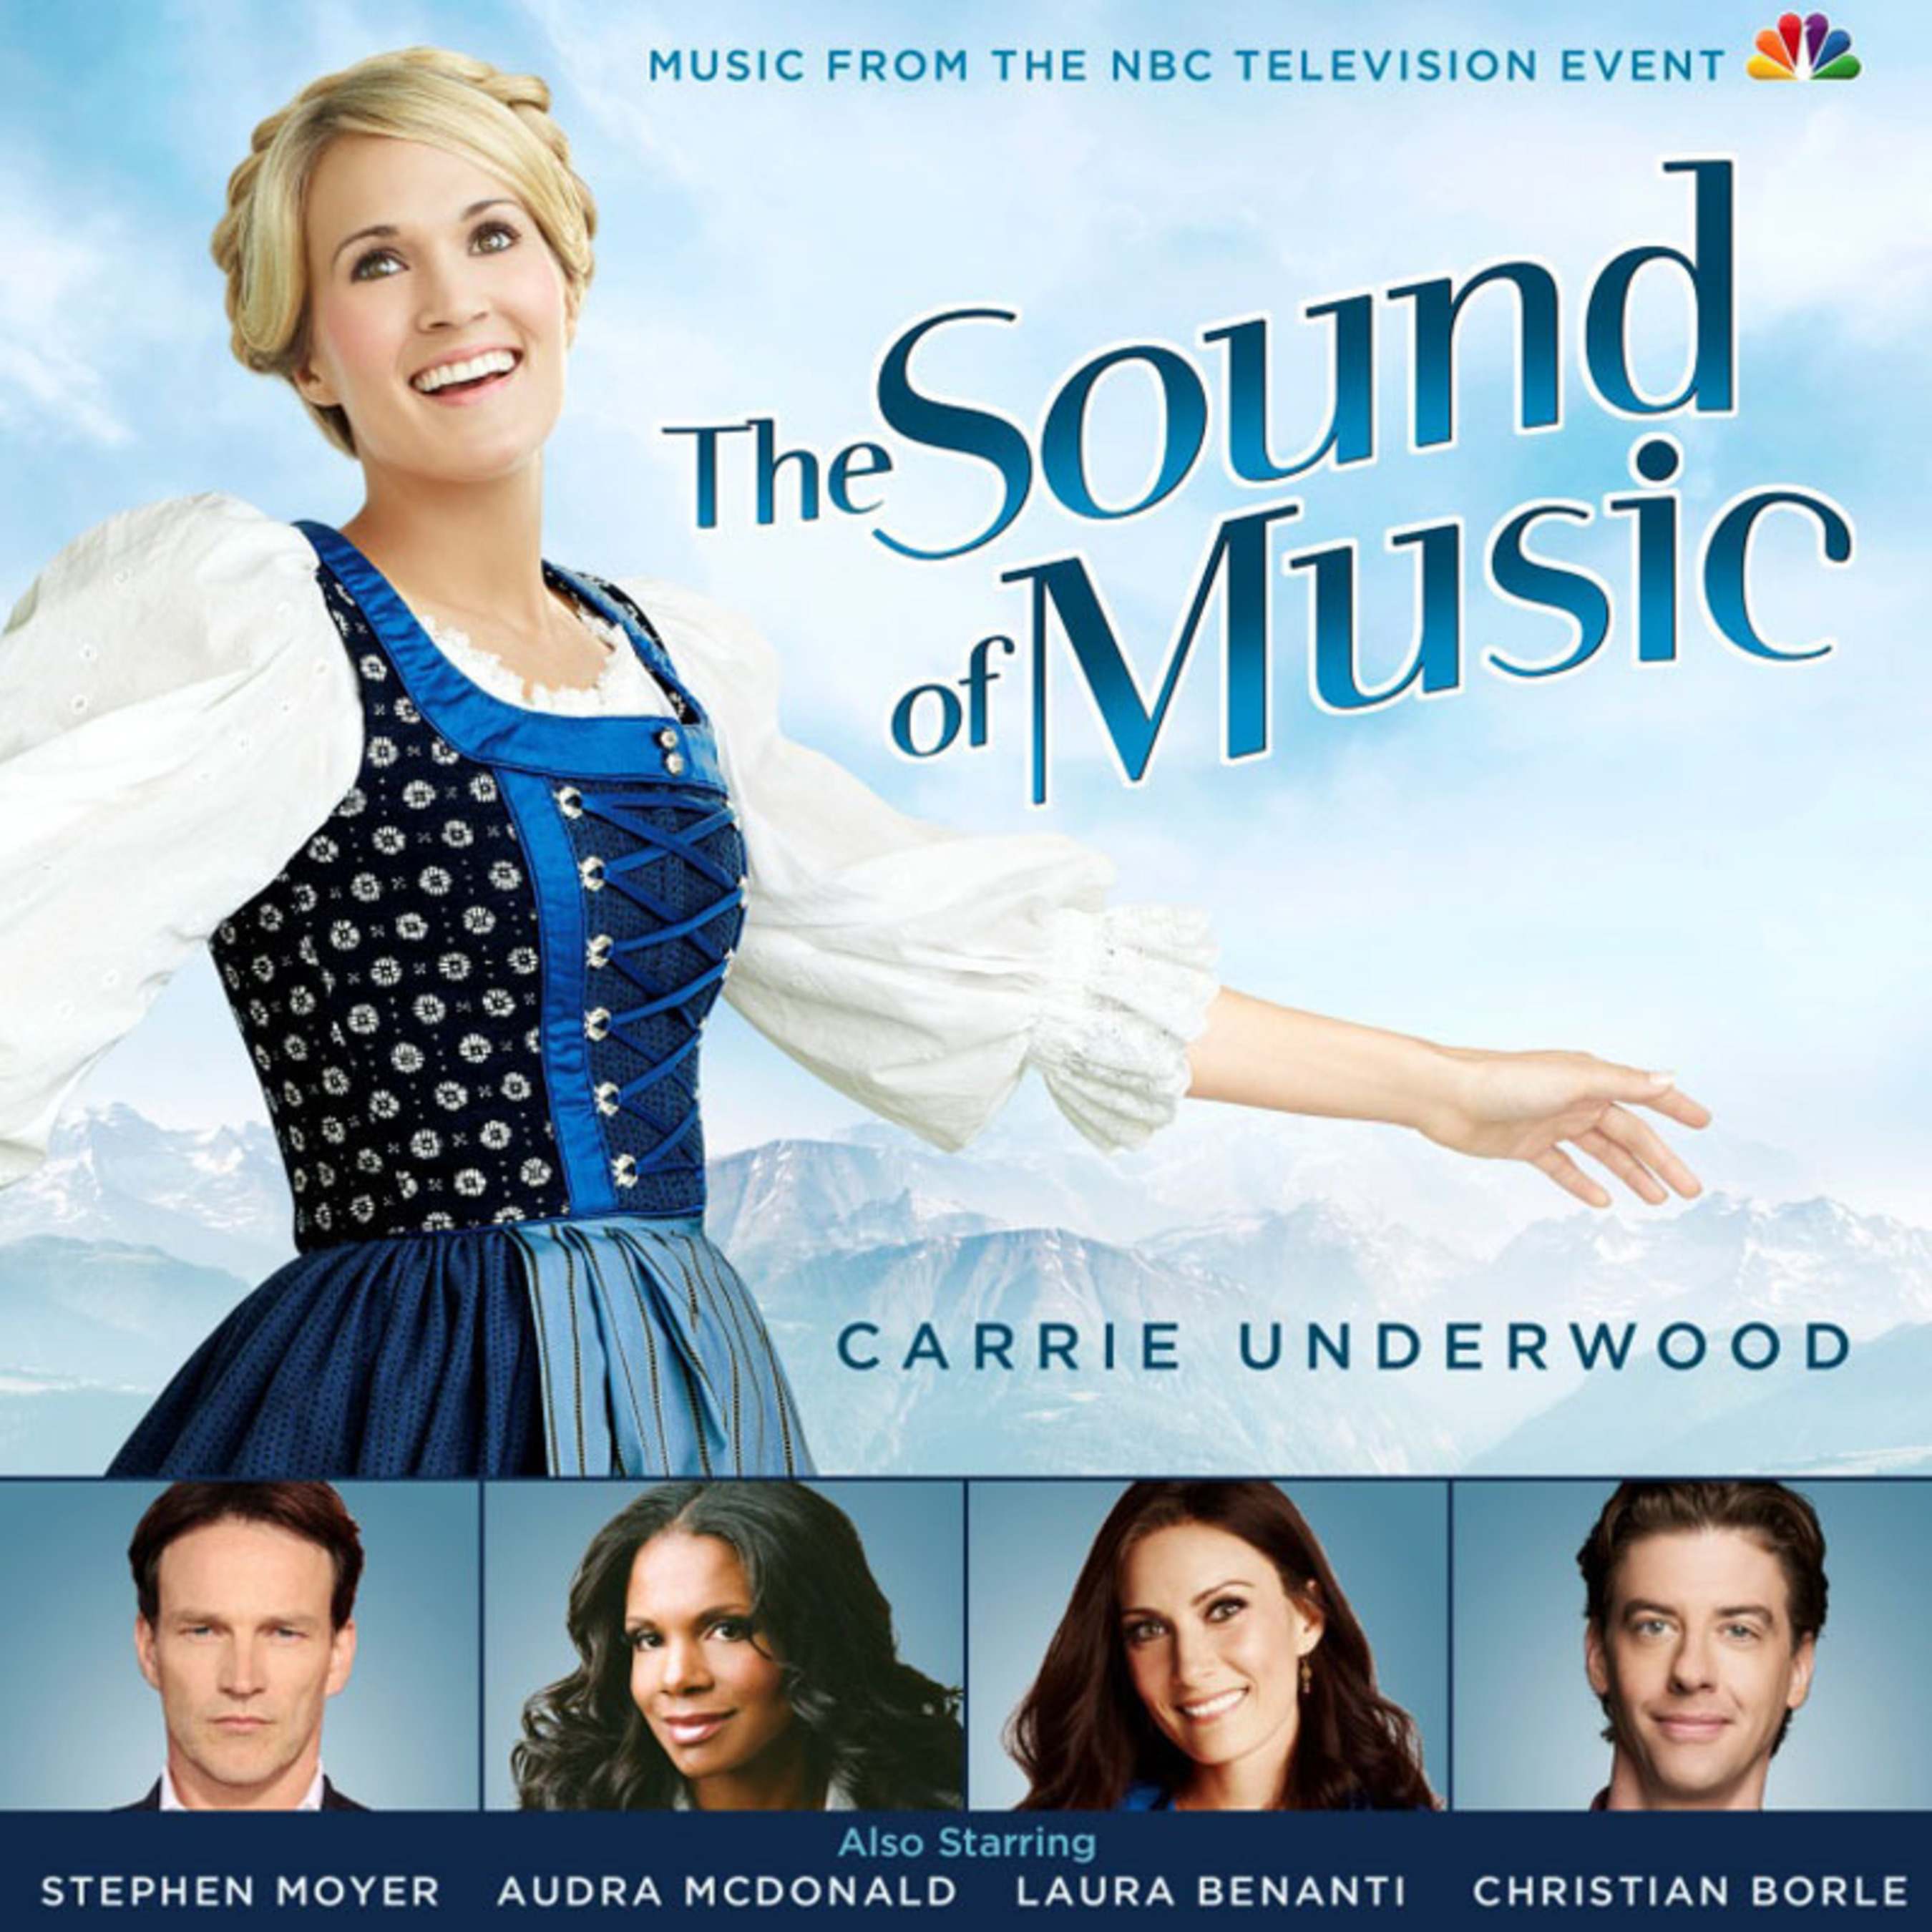 Sony Masterworks Releases Television Soundtrack to NBC's Live Broadcast of 'The Sound of Music' Starring Six-time Grammy Winner Carrie Underwood. (PRNewsFoto/Sony Masterworks) (PRNewsFoto/SONY MASTERWORKS)